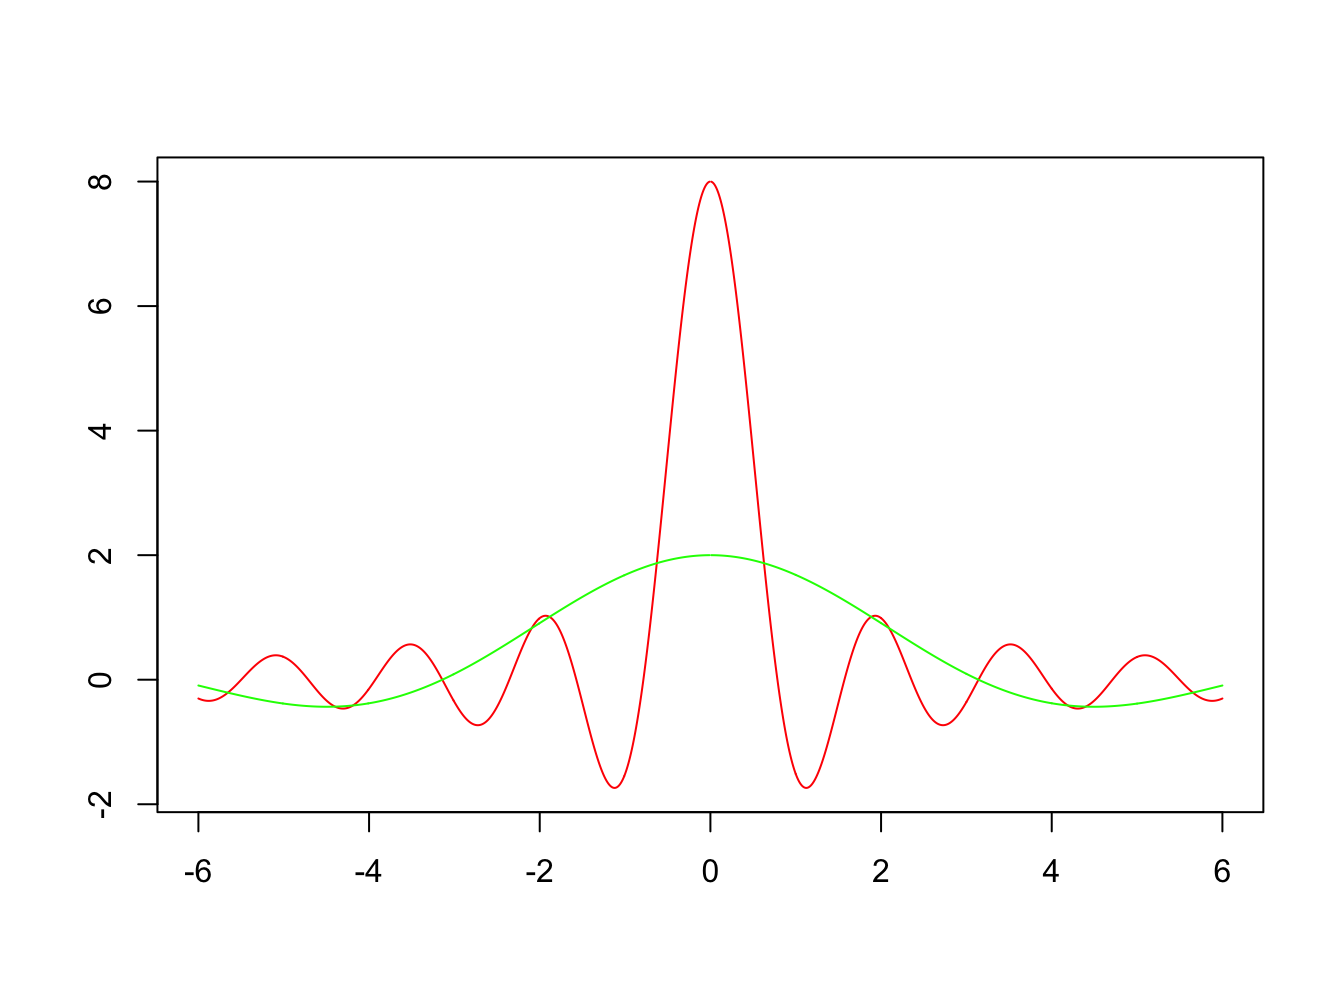 Graph of the Fourier transform for $d = 1$ (green) and $d = 4$ (red)